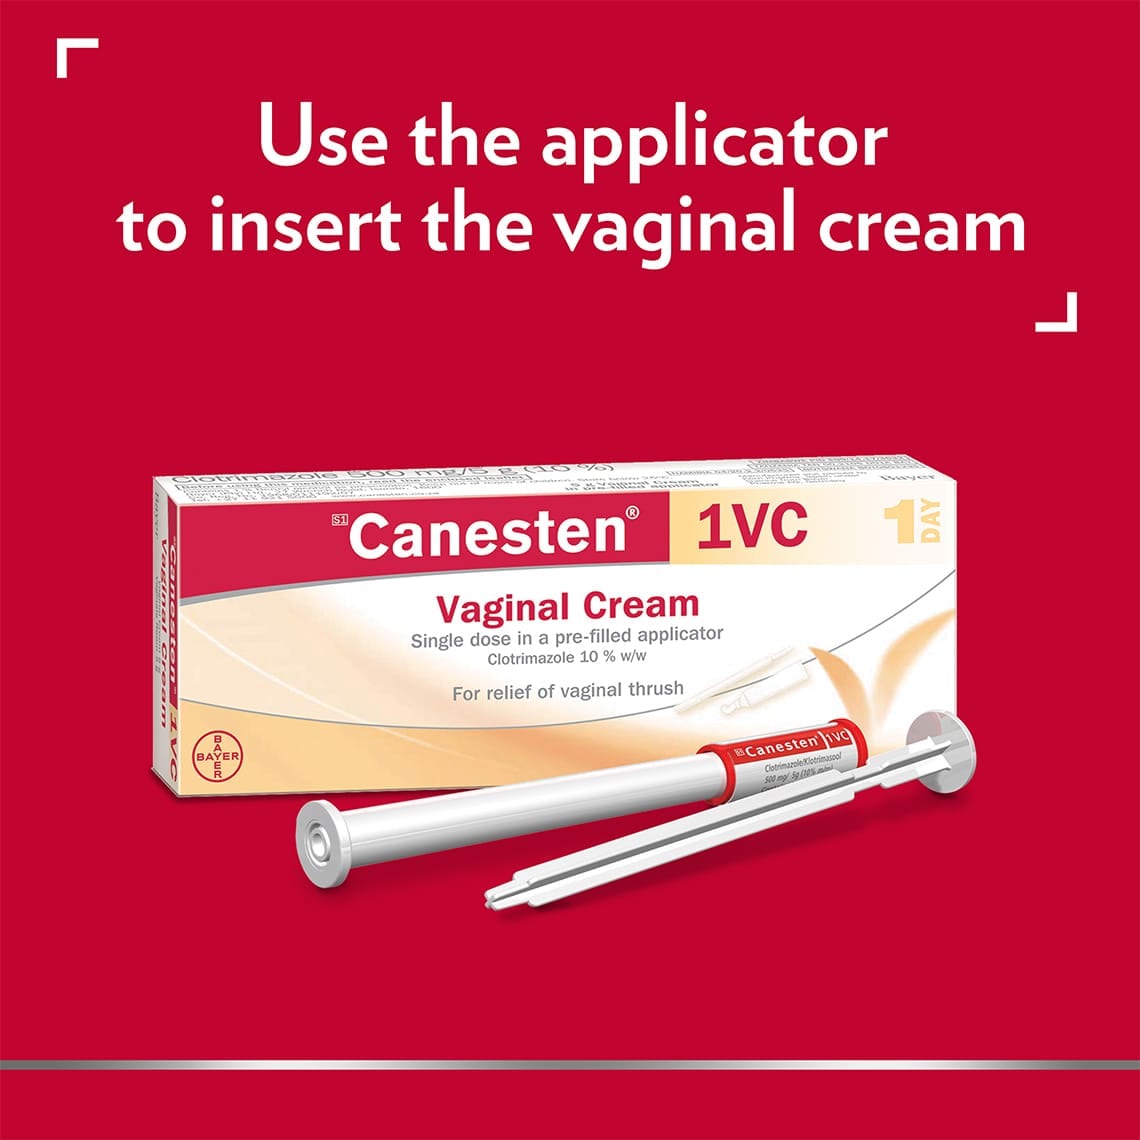 Canesten Thrush Internal Cream 10% w/w vaginal cream and applicator, with caption on top: Use the applicator to insert the vaginal cream